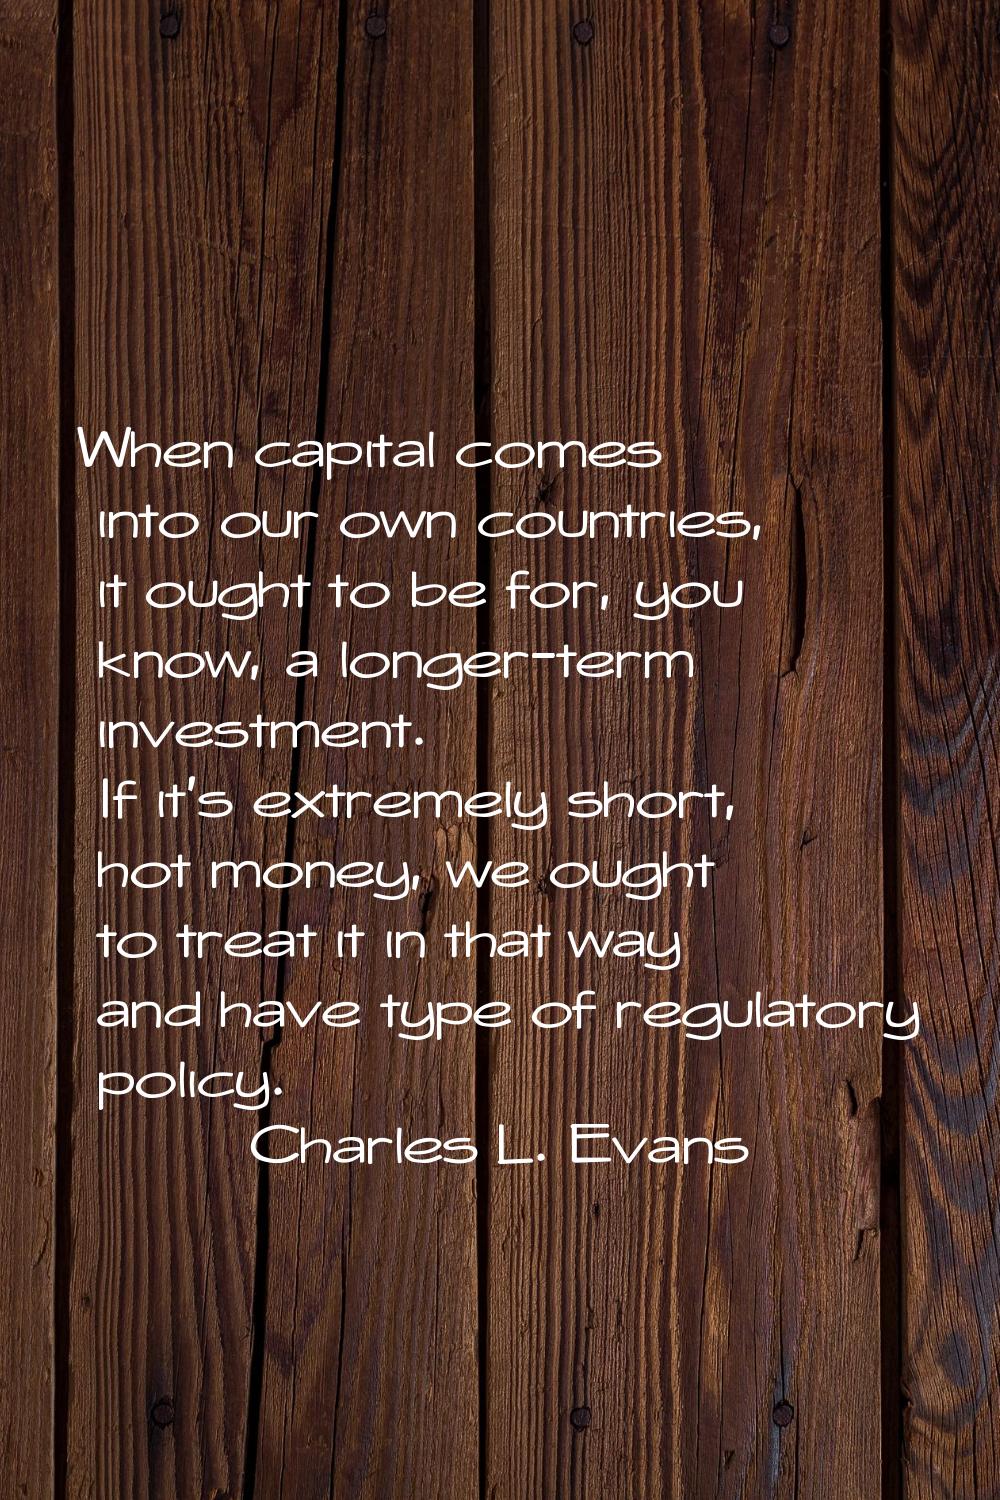 When capital comes into our own countries, it ought to be for, you know, a longer-term investment. 